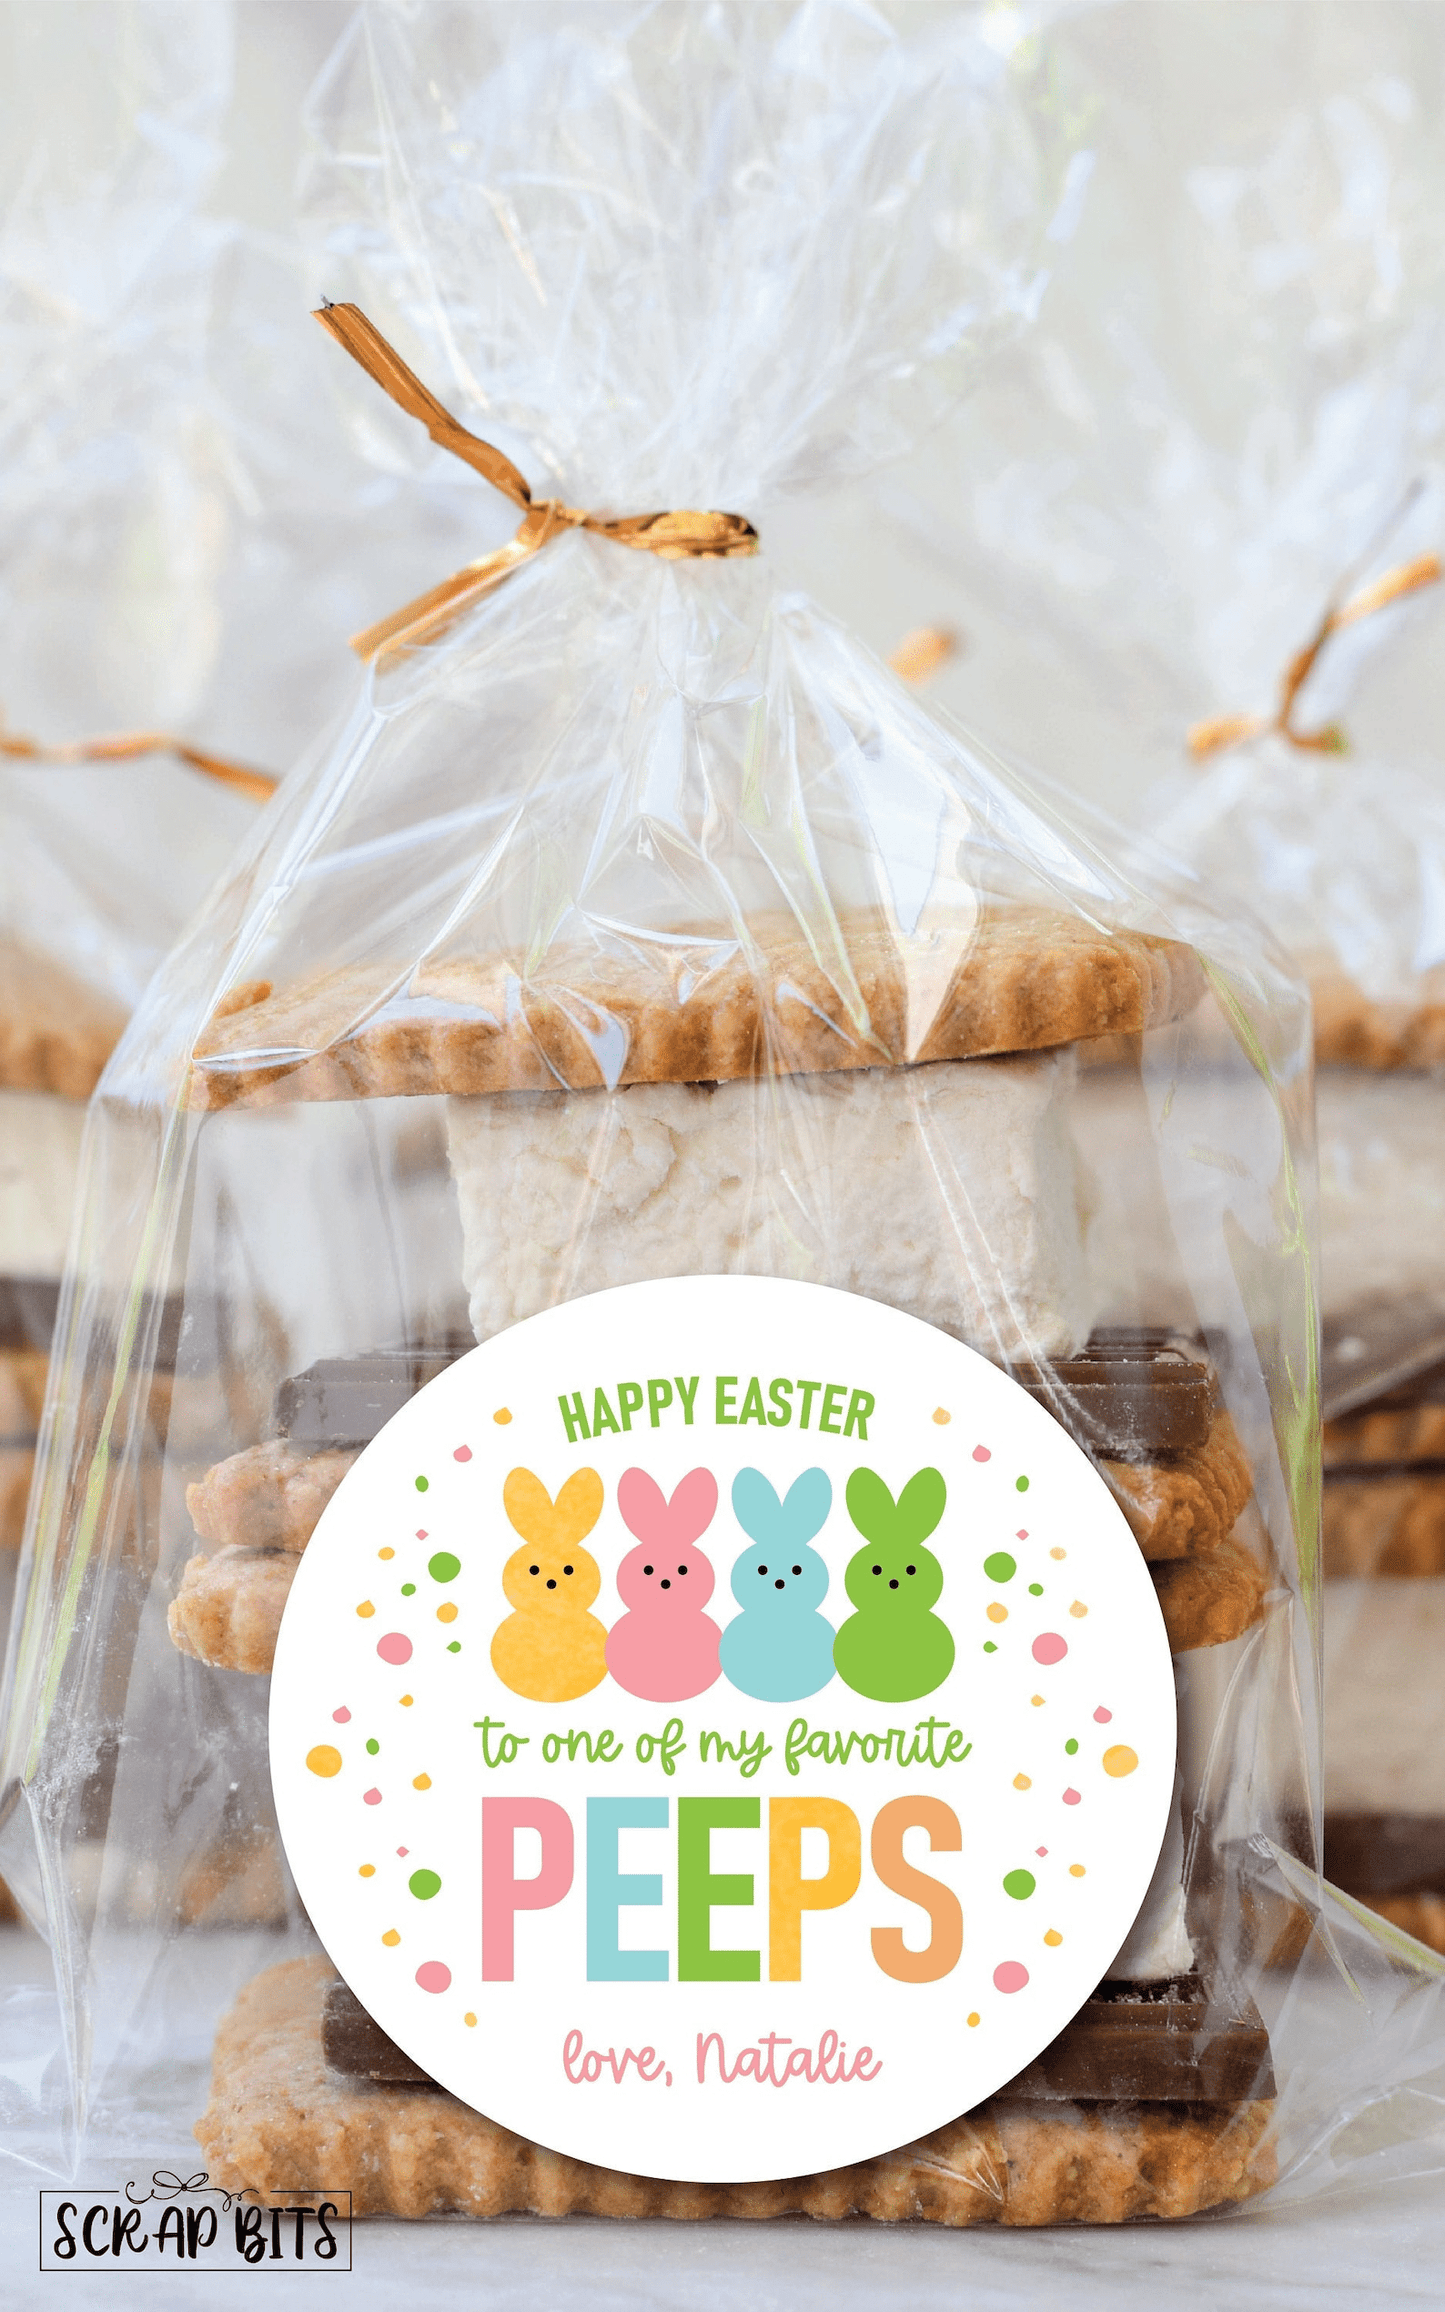 Happy Easter To One Of My Favorite Peeps . Personalized Easter Gift Labels - Scrap Bits